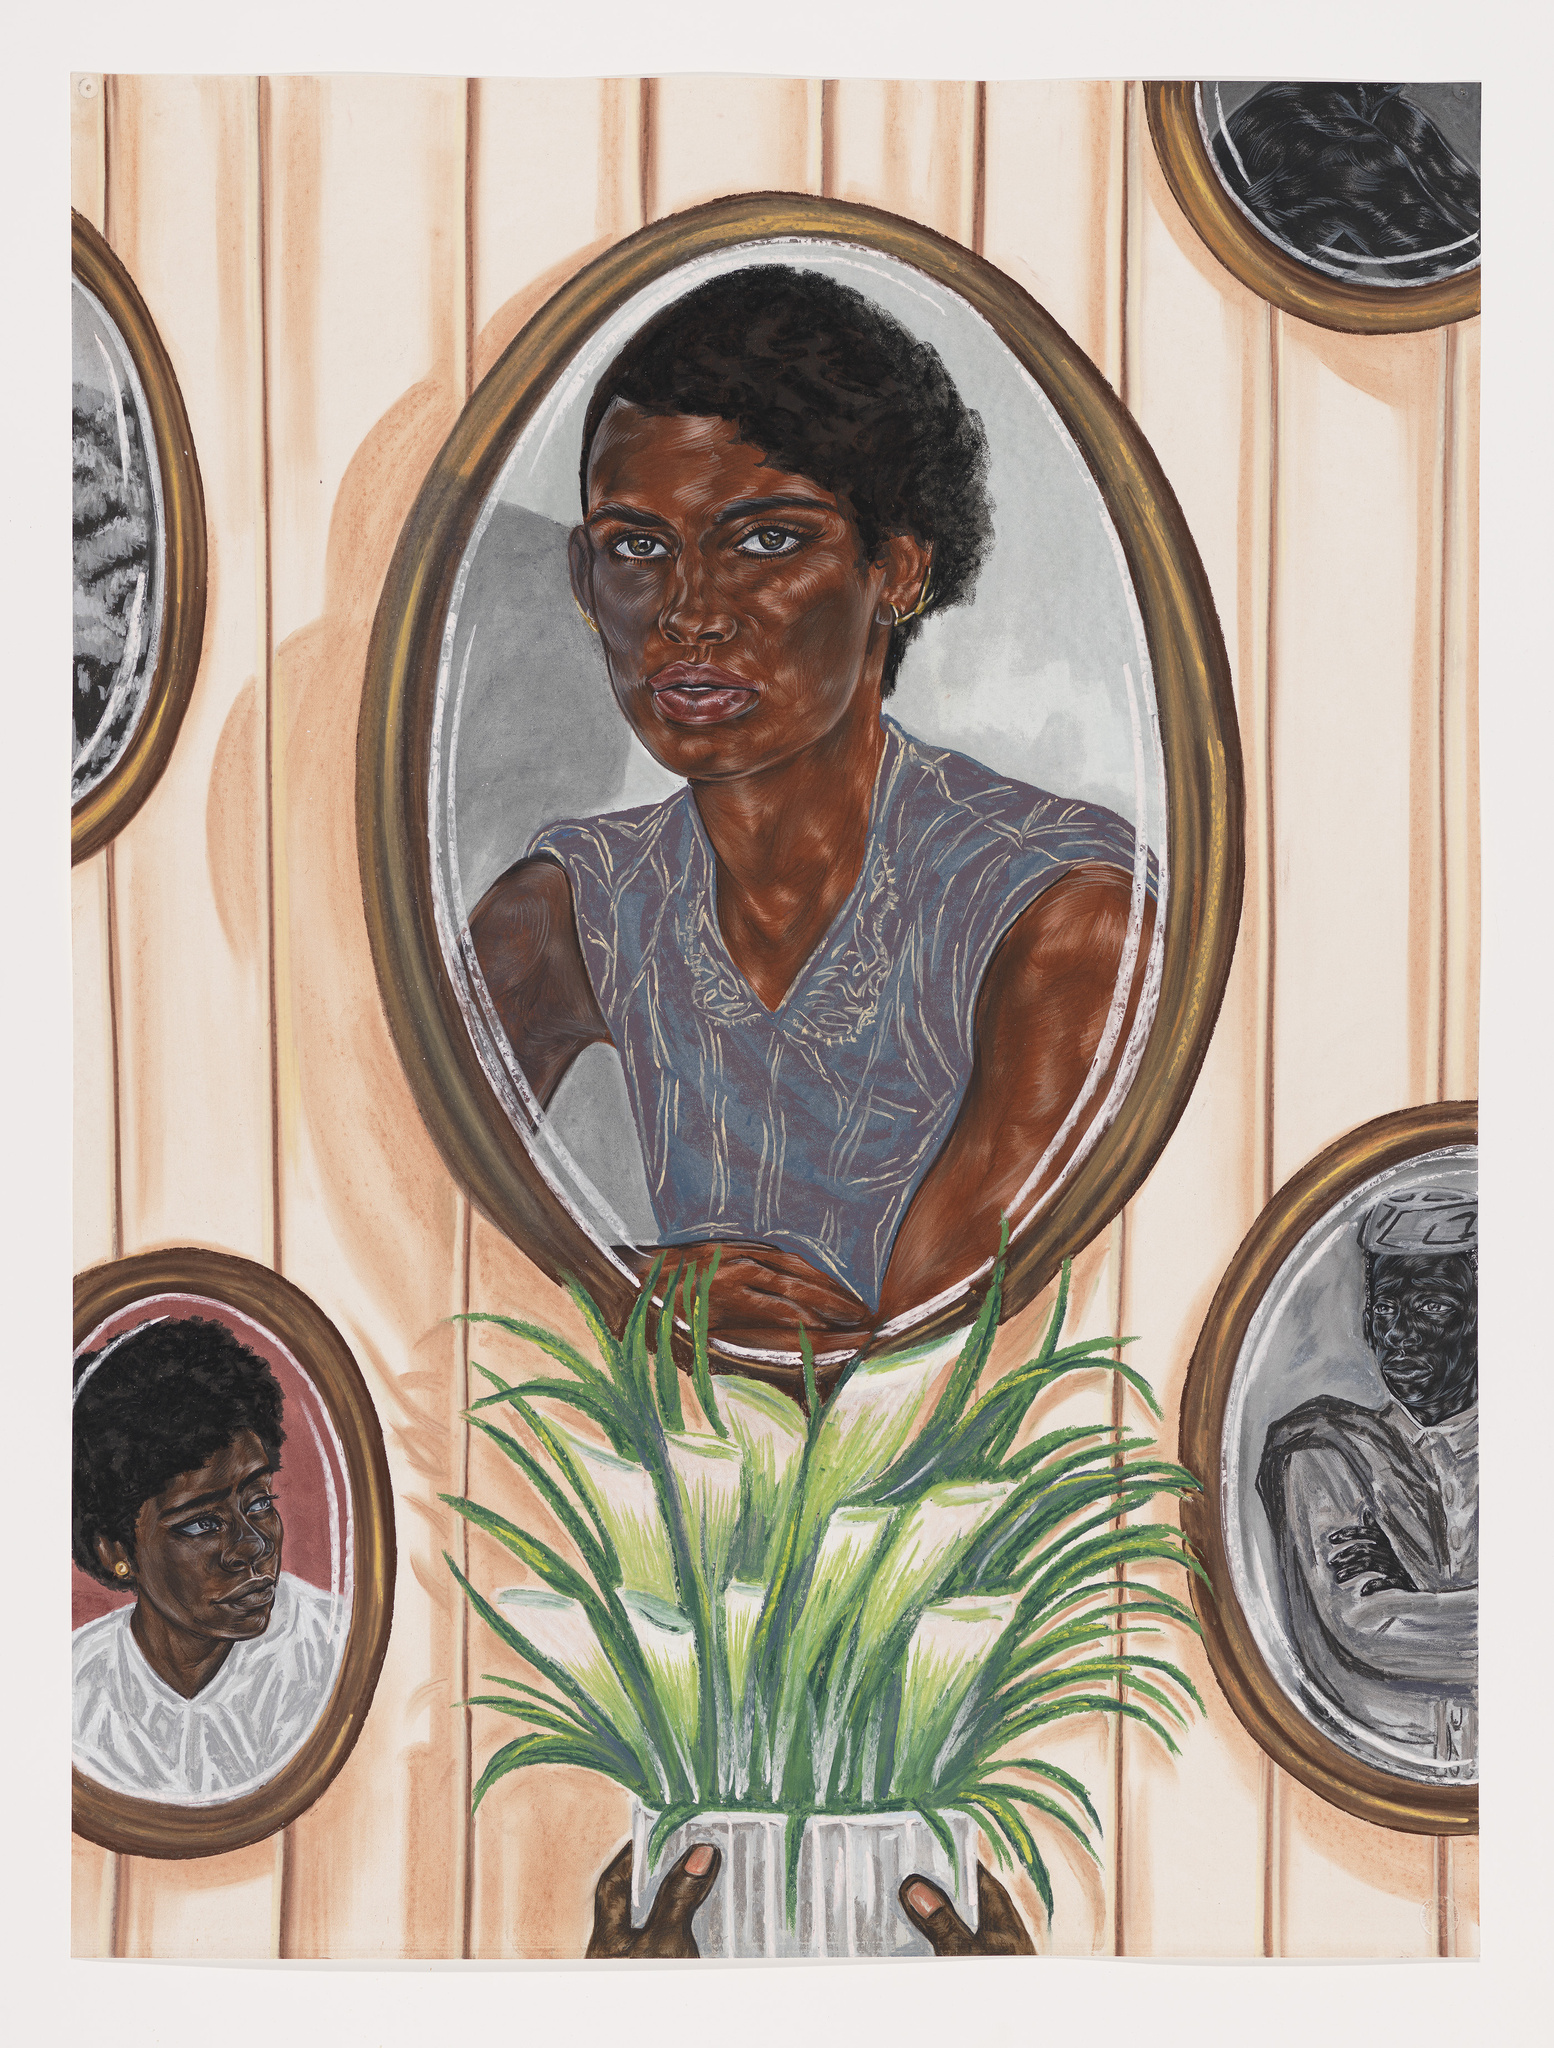 A wall with a portrait of a Black woman, with additional portraits and hands holding a vase of lillies surrounding her.